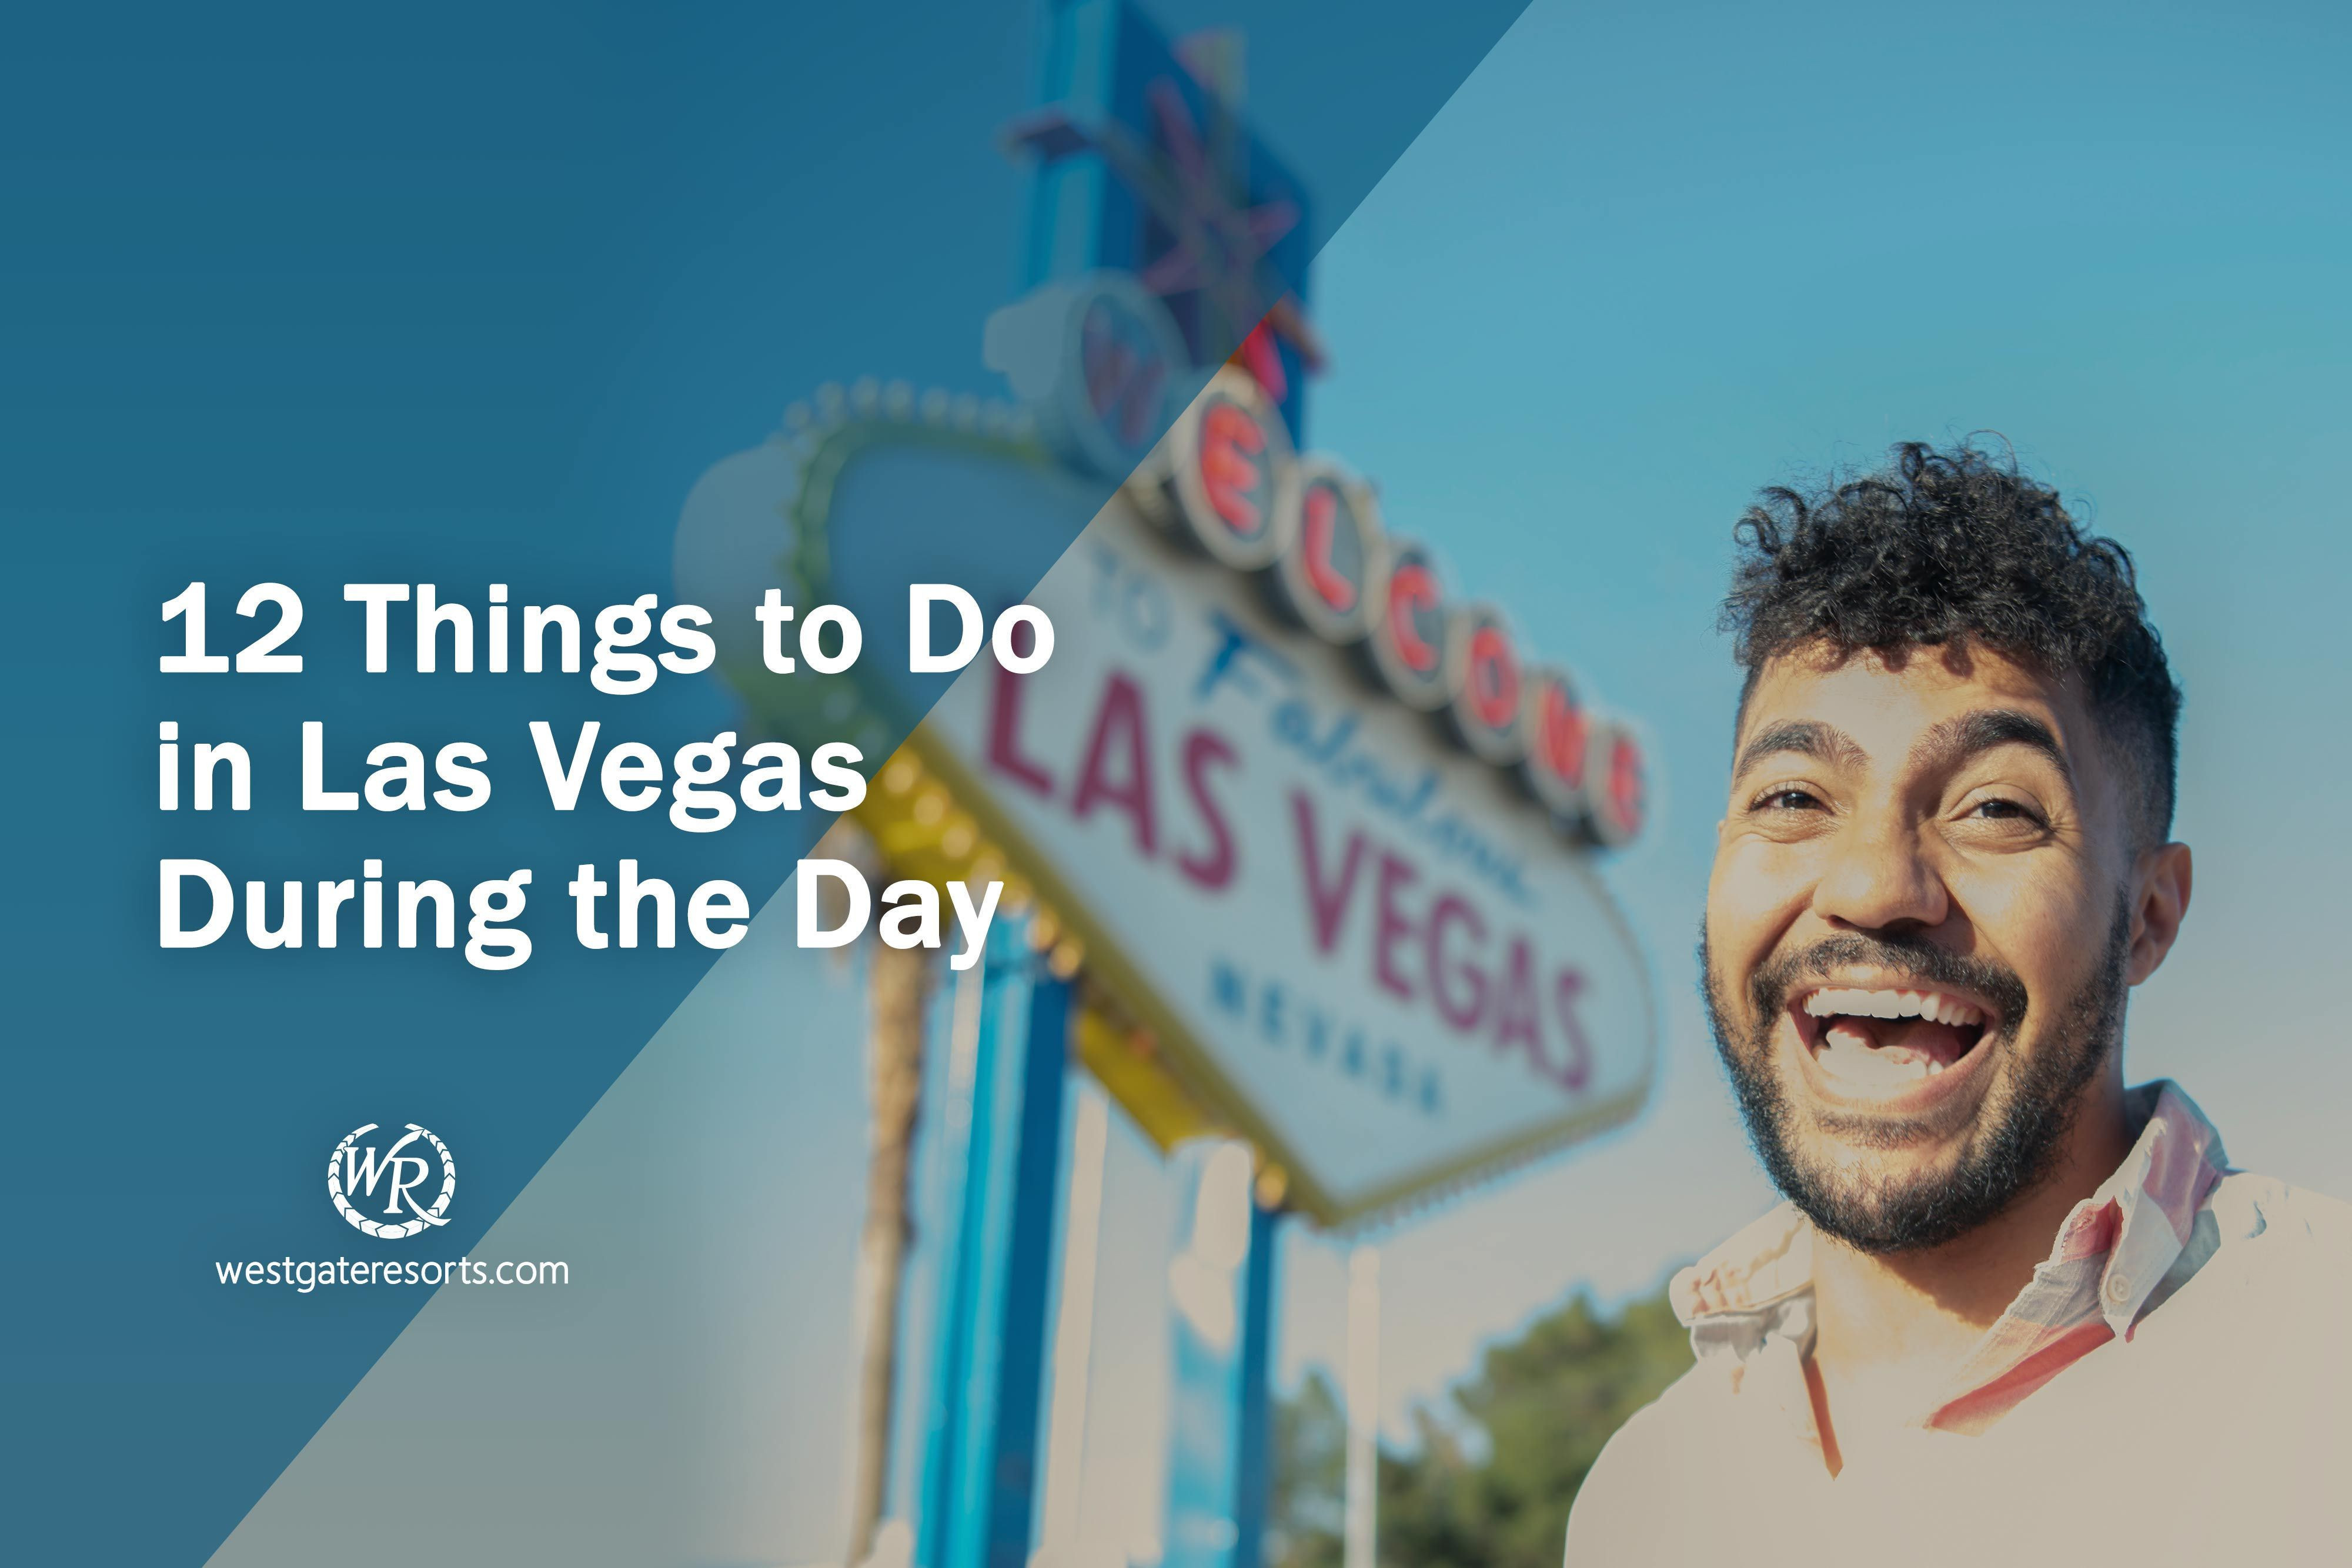 12 Things to Do in Las Vegas During the Day